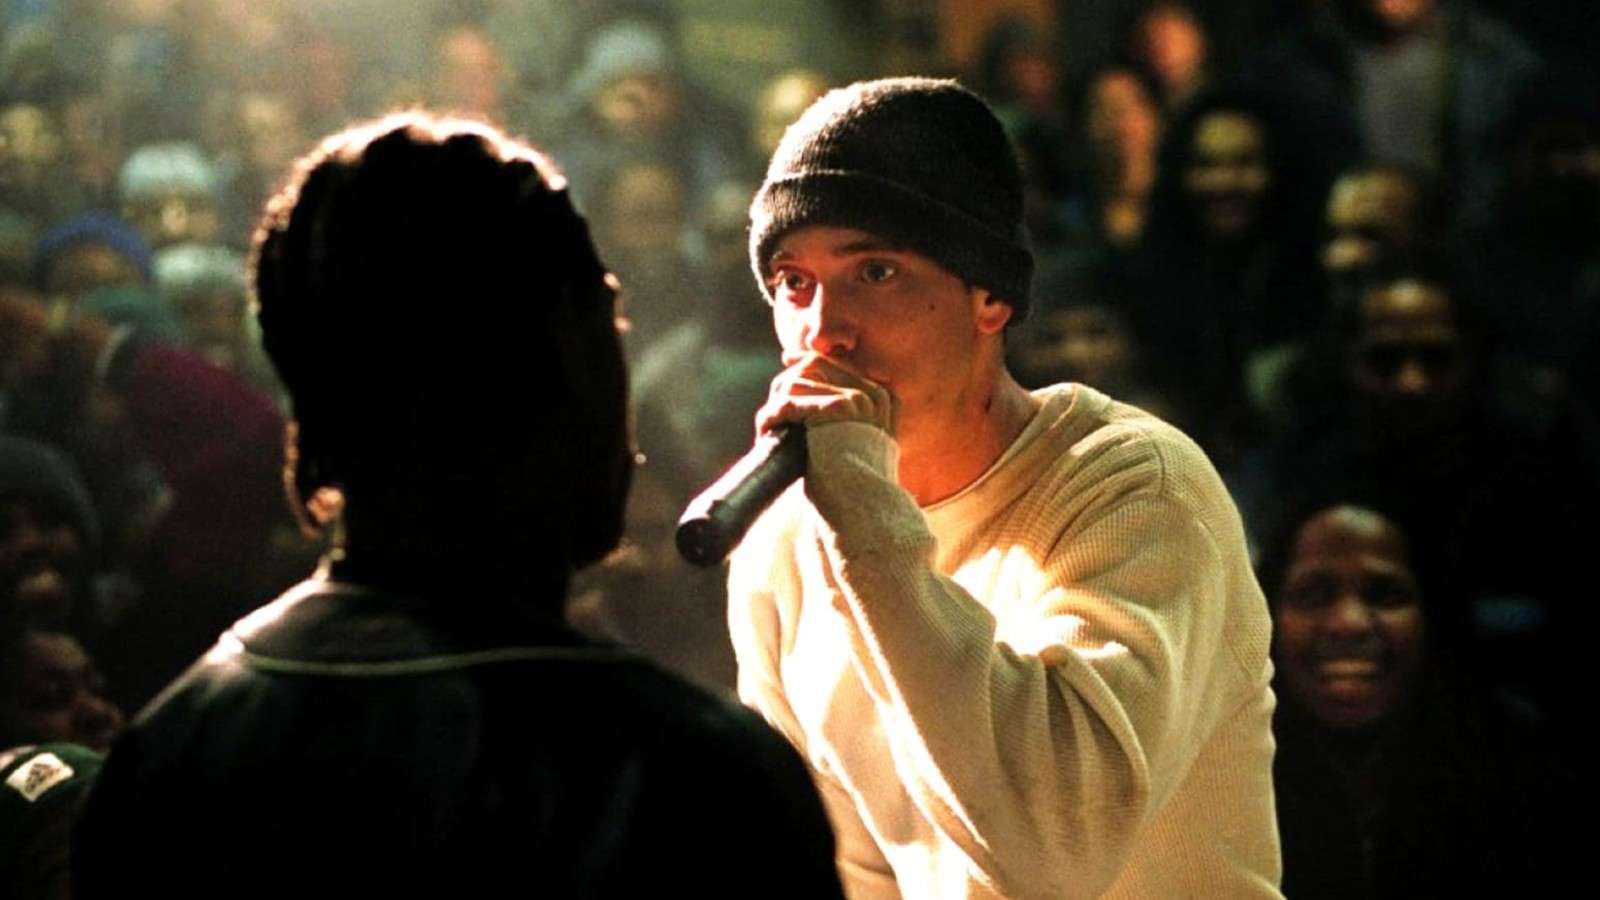 Eminem in 8 Mile, which is being adapted into a TV show